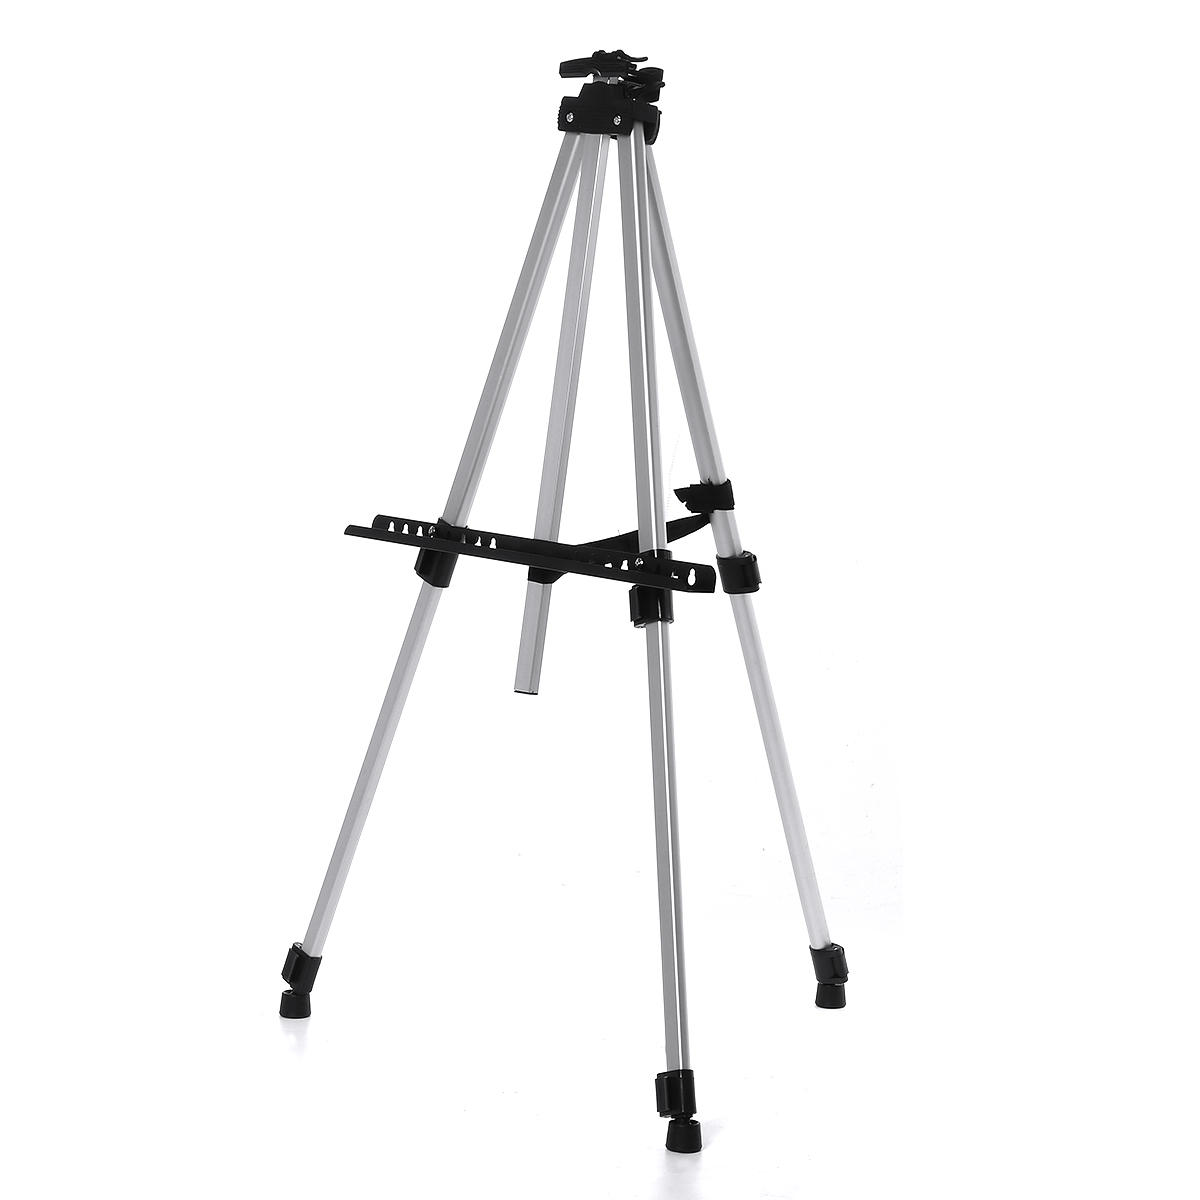 Foldable Aluminum Alloy Painting Tripod Painting Easel Telescopic Tripod Drawing Board Display Stand Sketching Rack with